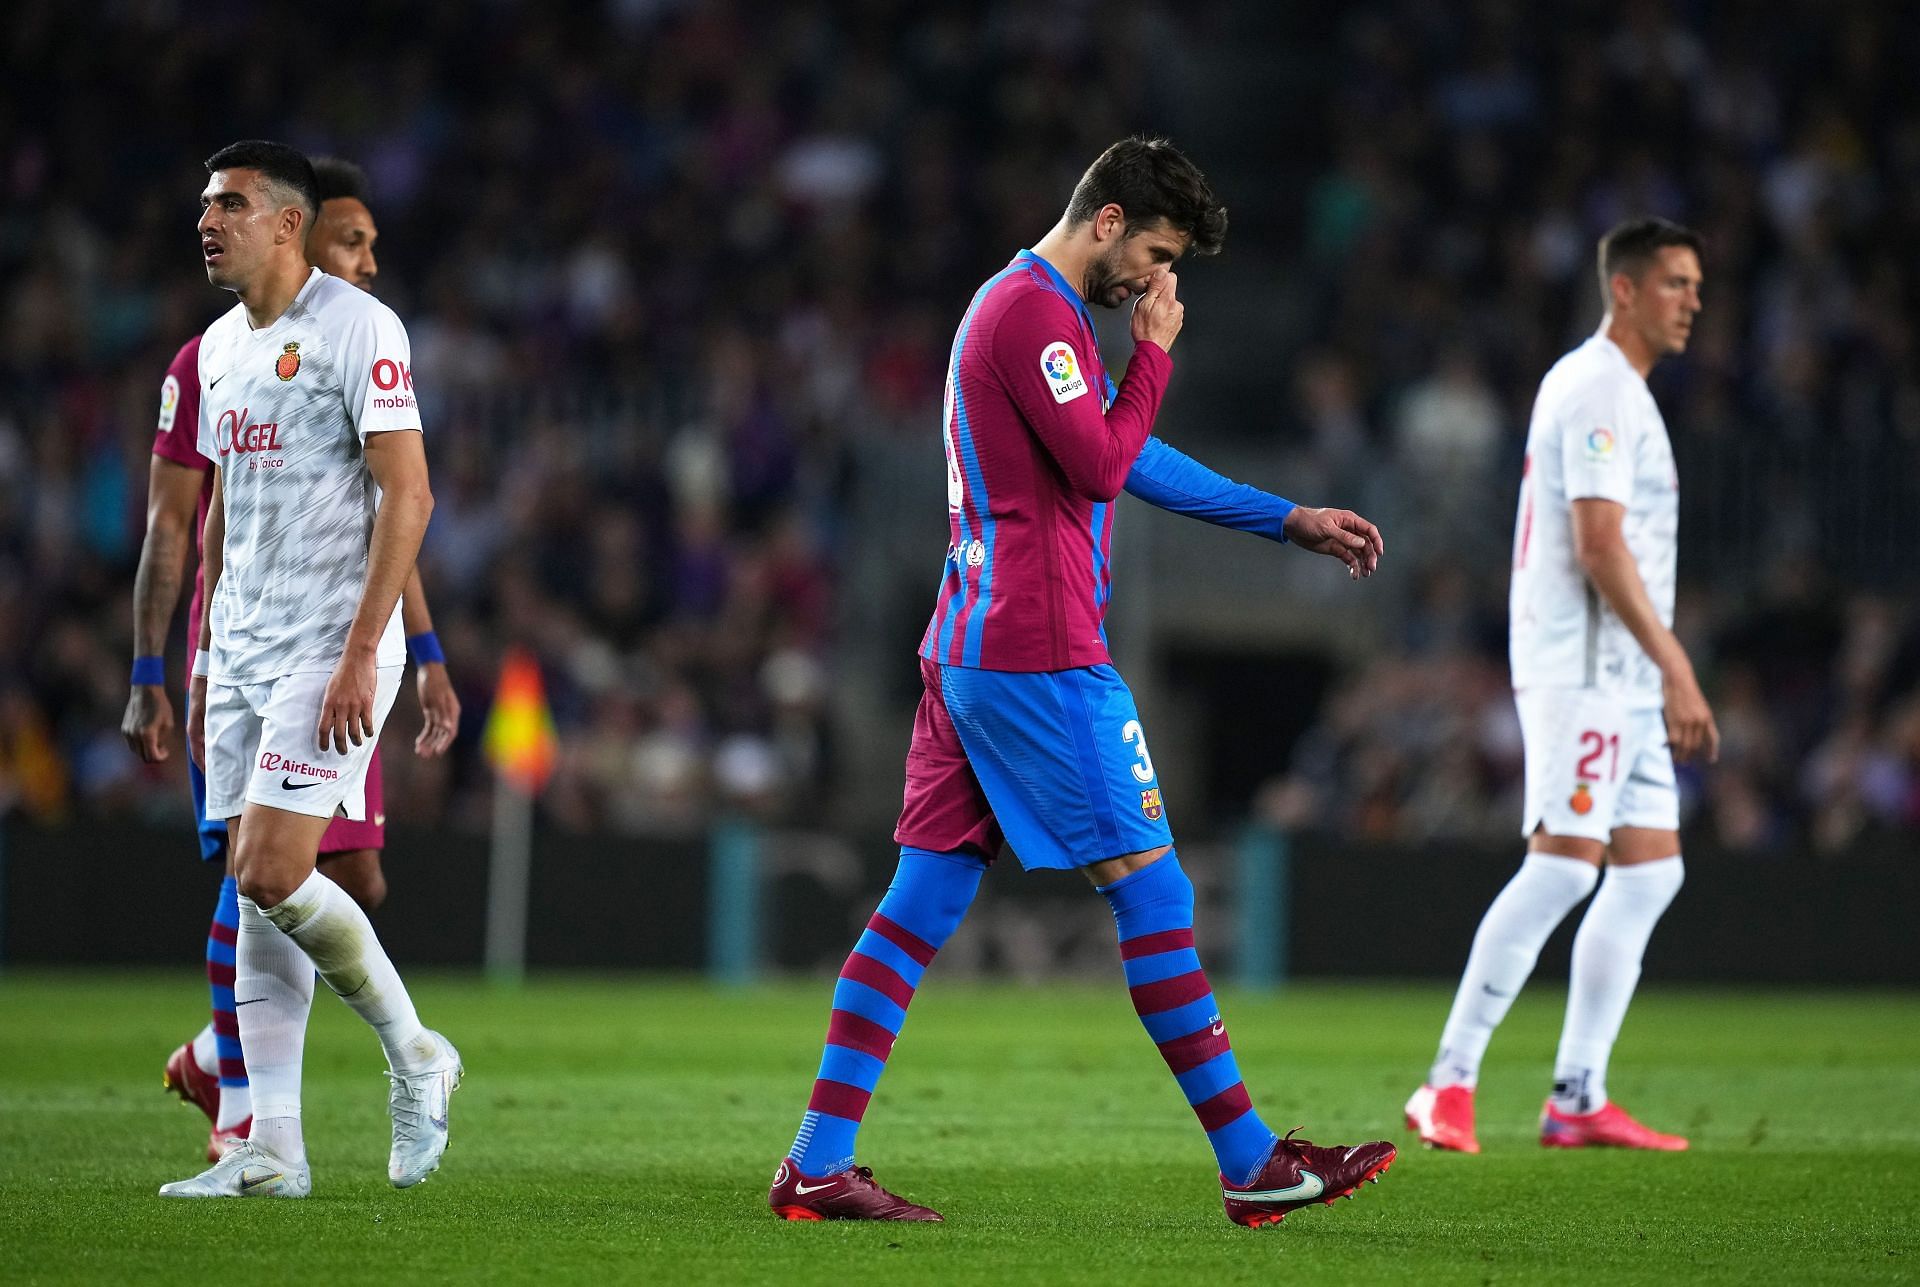 A difficult period for the Barcelona defender